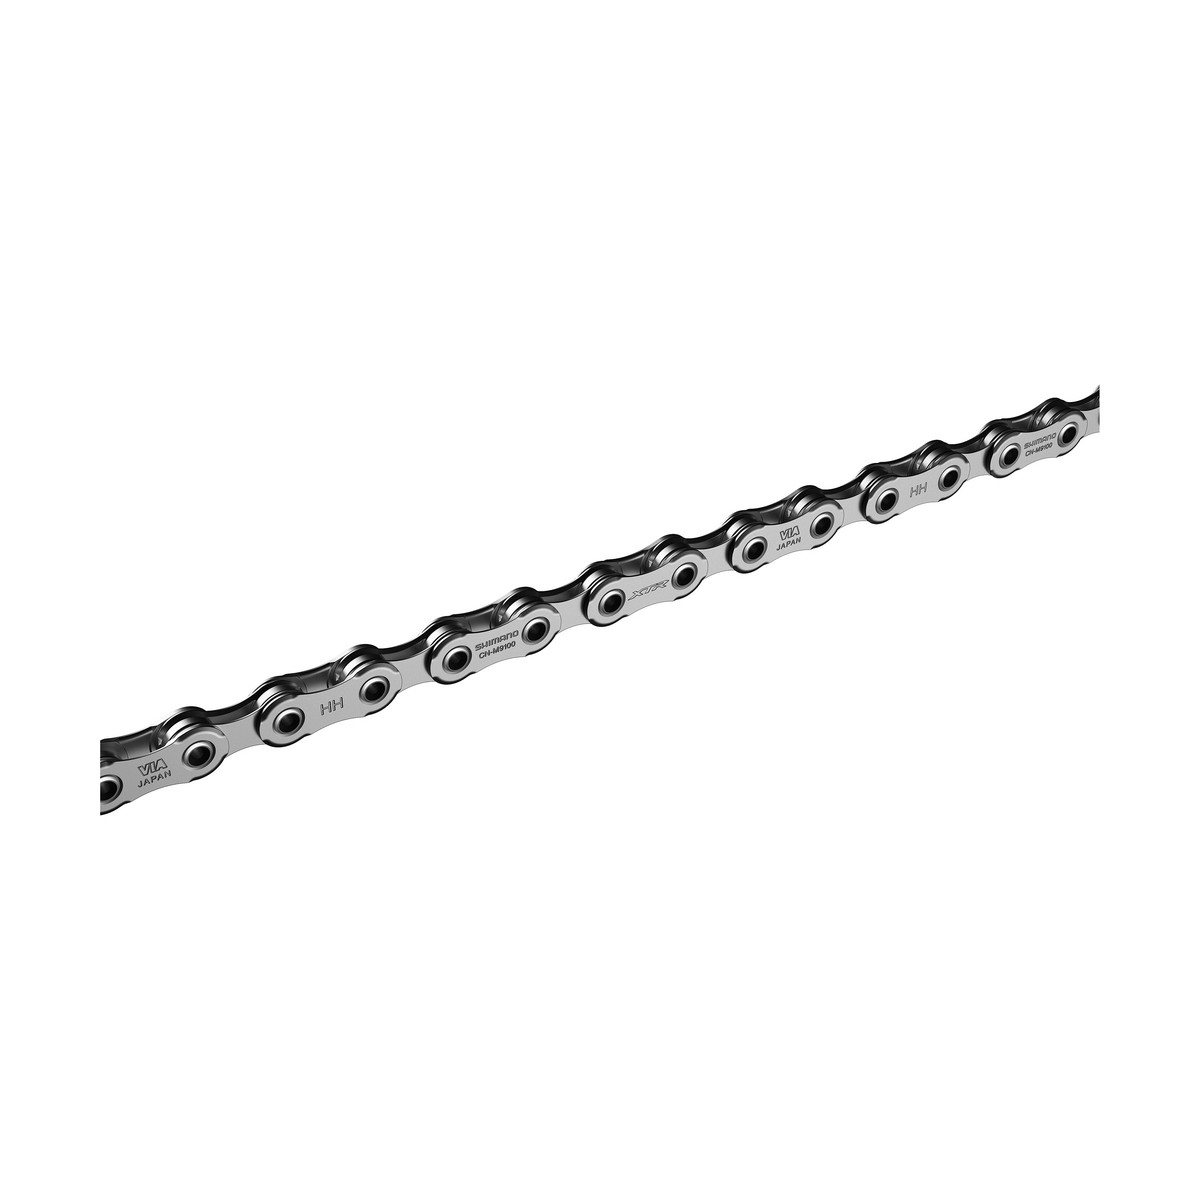 XTR/Dura-Ace CN-M9100 12-speed Quick Link chain 116 links 2019